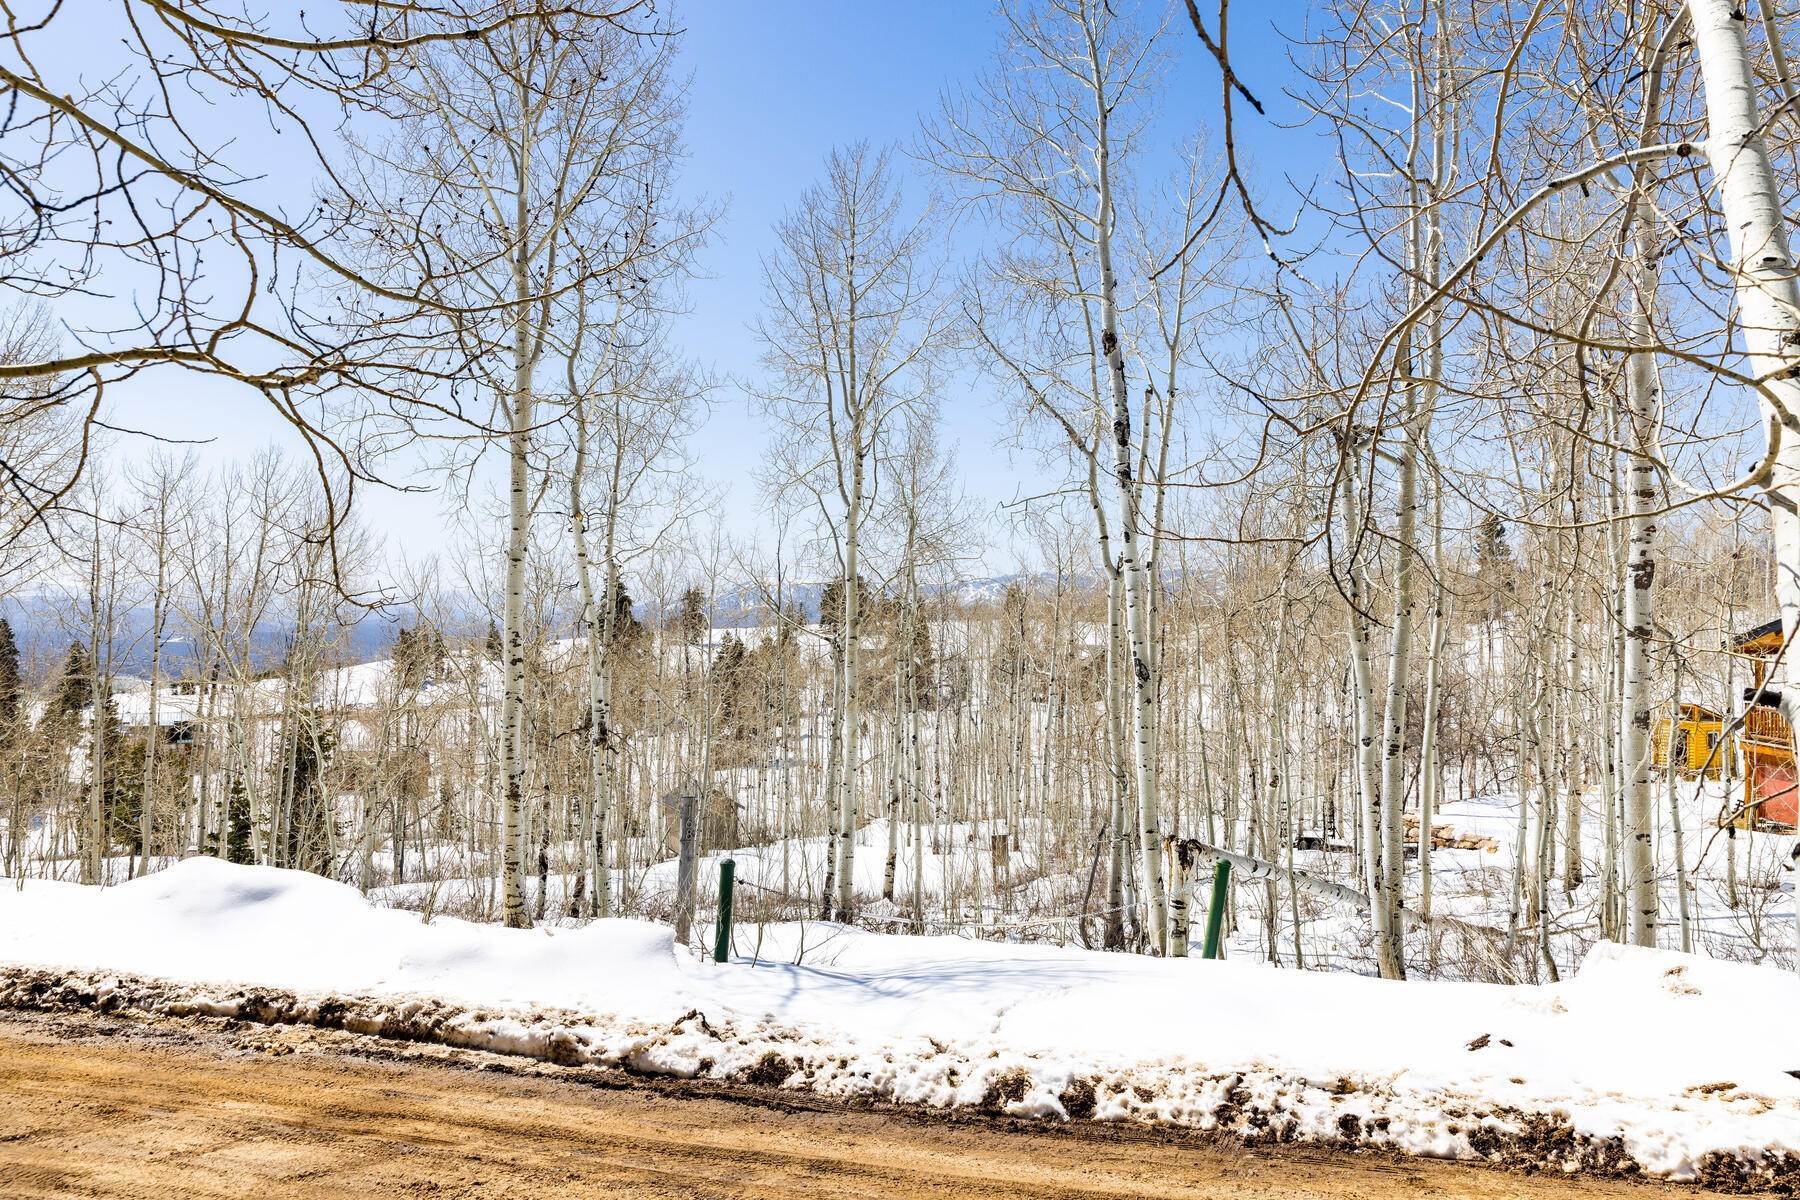 Land for Sale at Tollgate Lot Ready to Build on. Septic, Electric, Water and Driveway Installed 1687 Heather Lane, Lot 84 Wanship, Utah 84017 United States